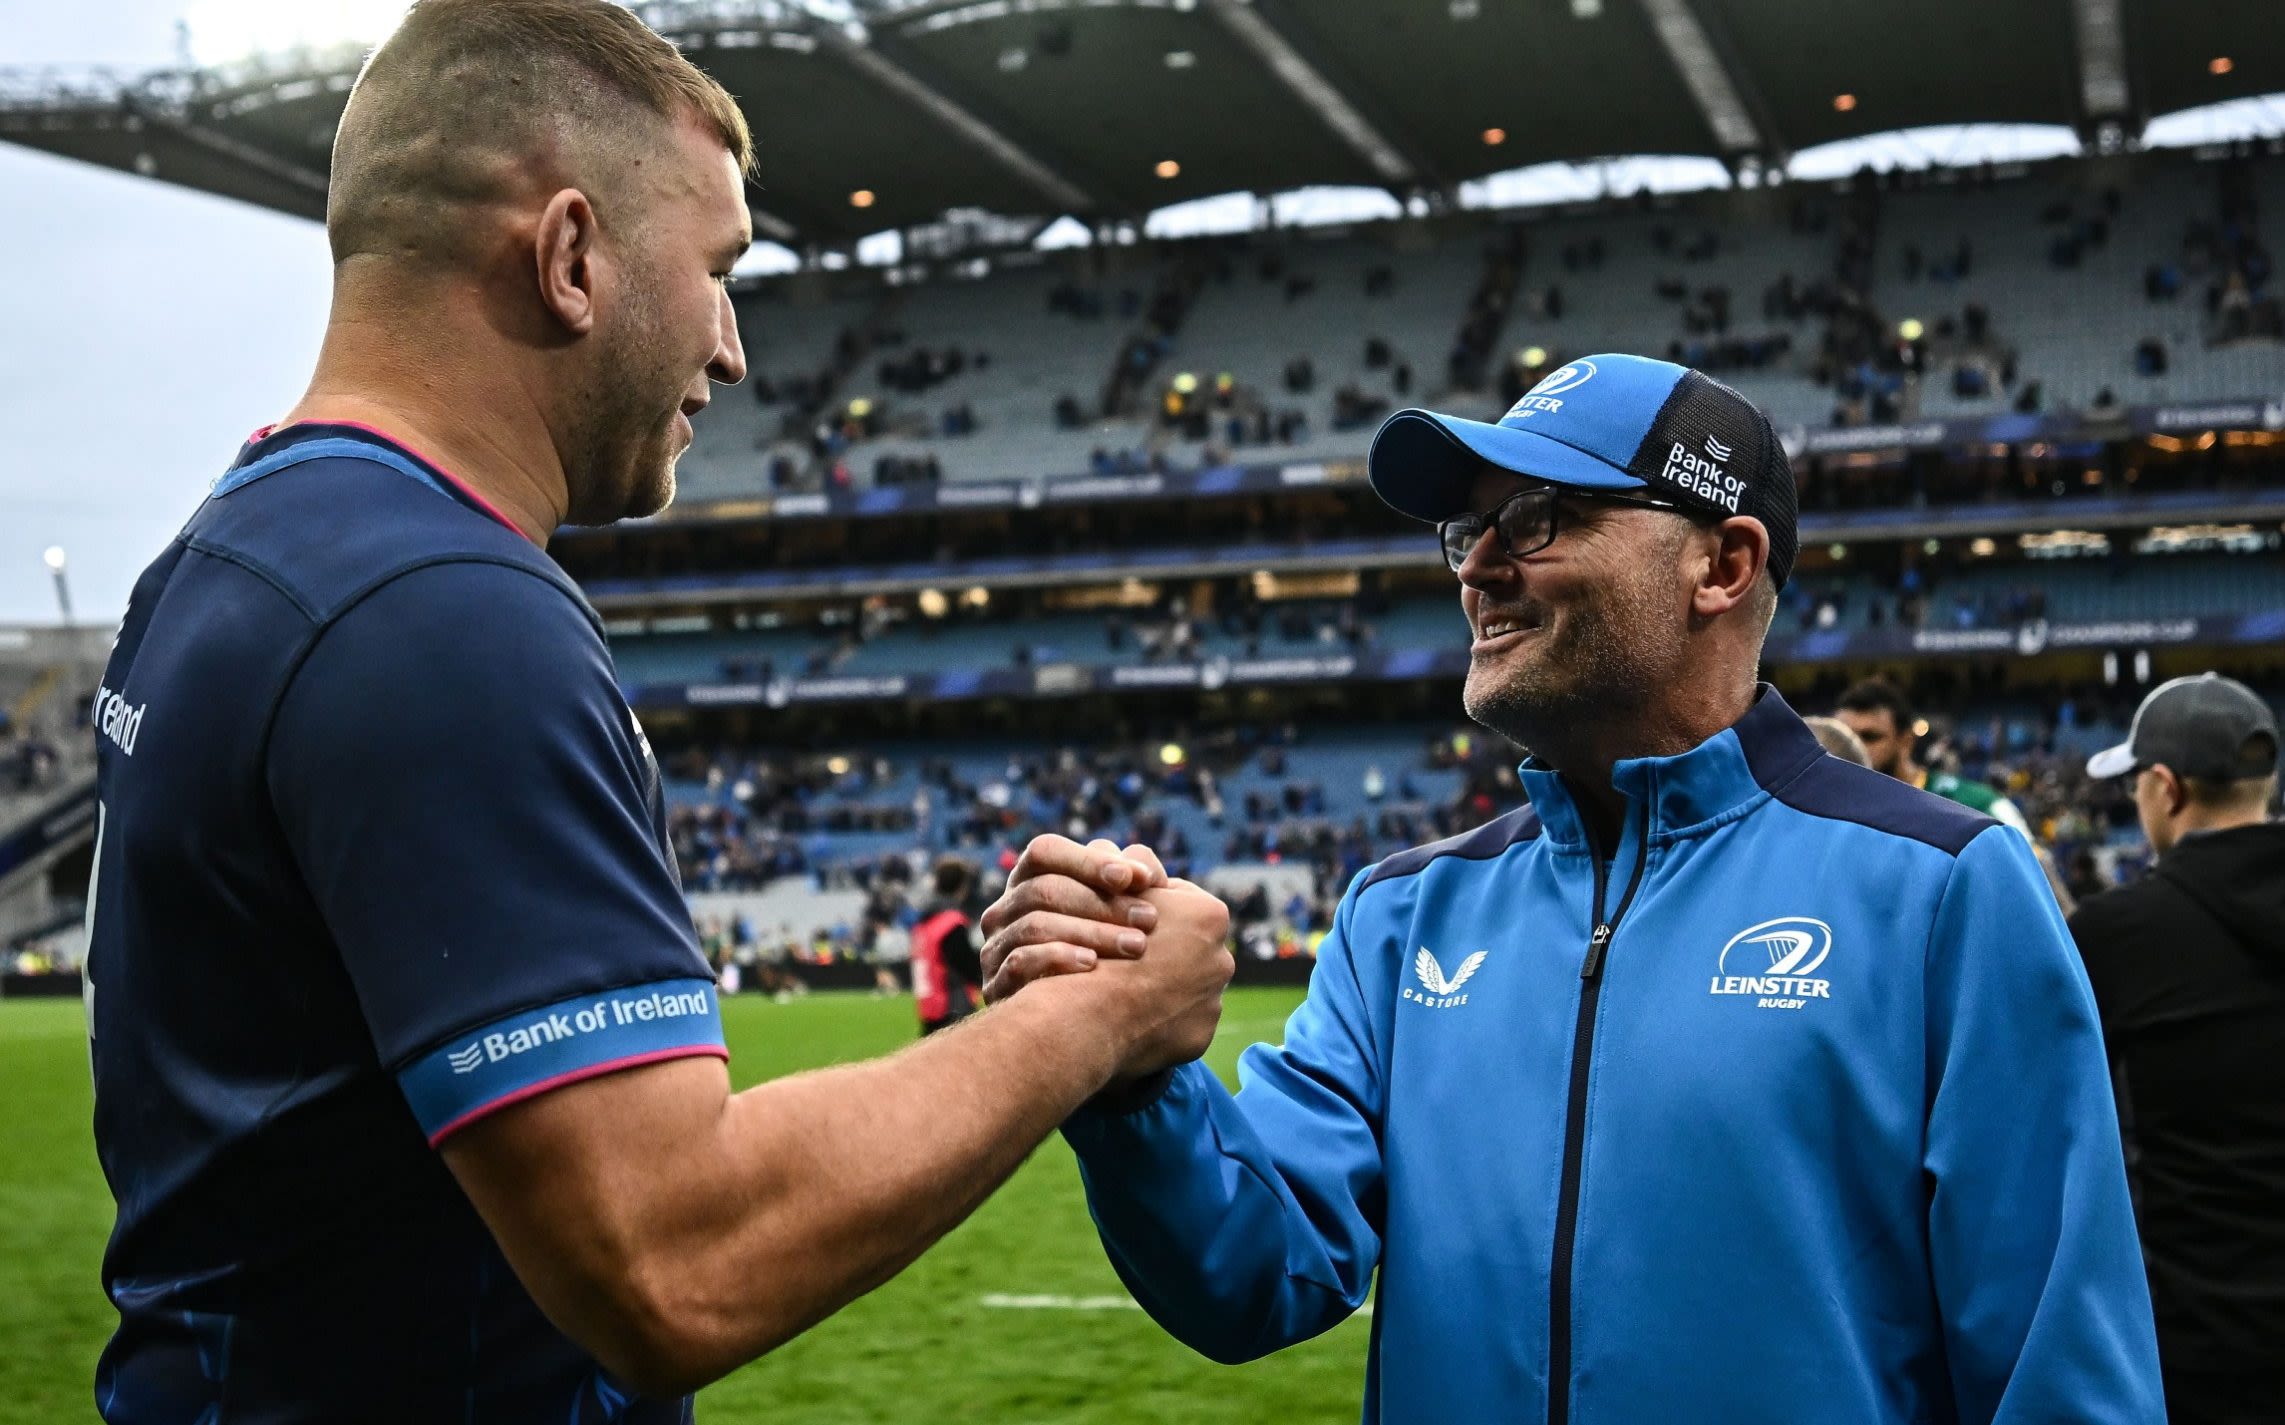 Inside the ‘Boksification’ of Leinster under super coach Jacques Nienaber